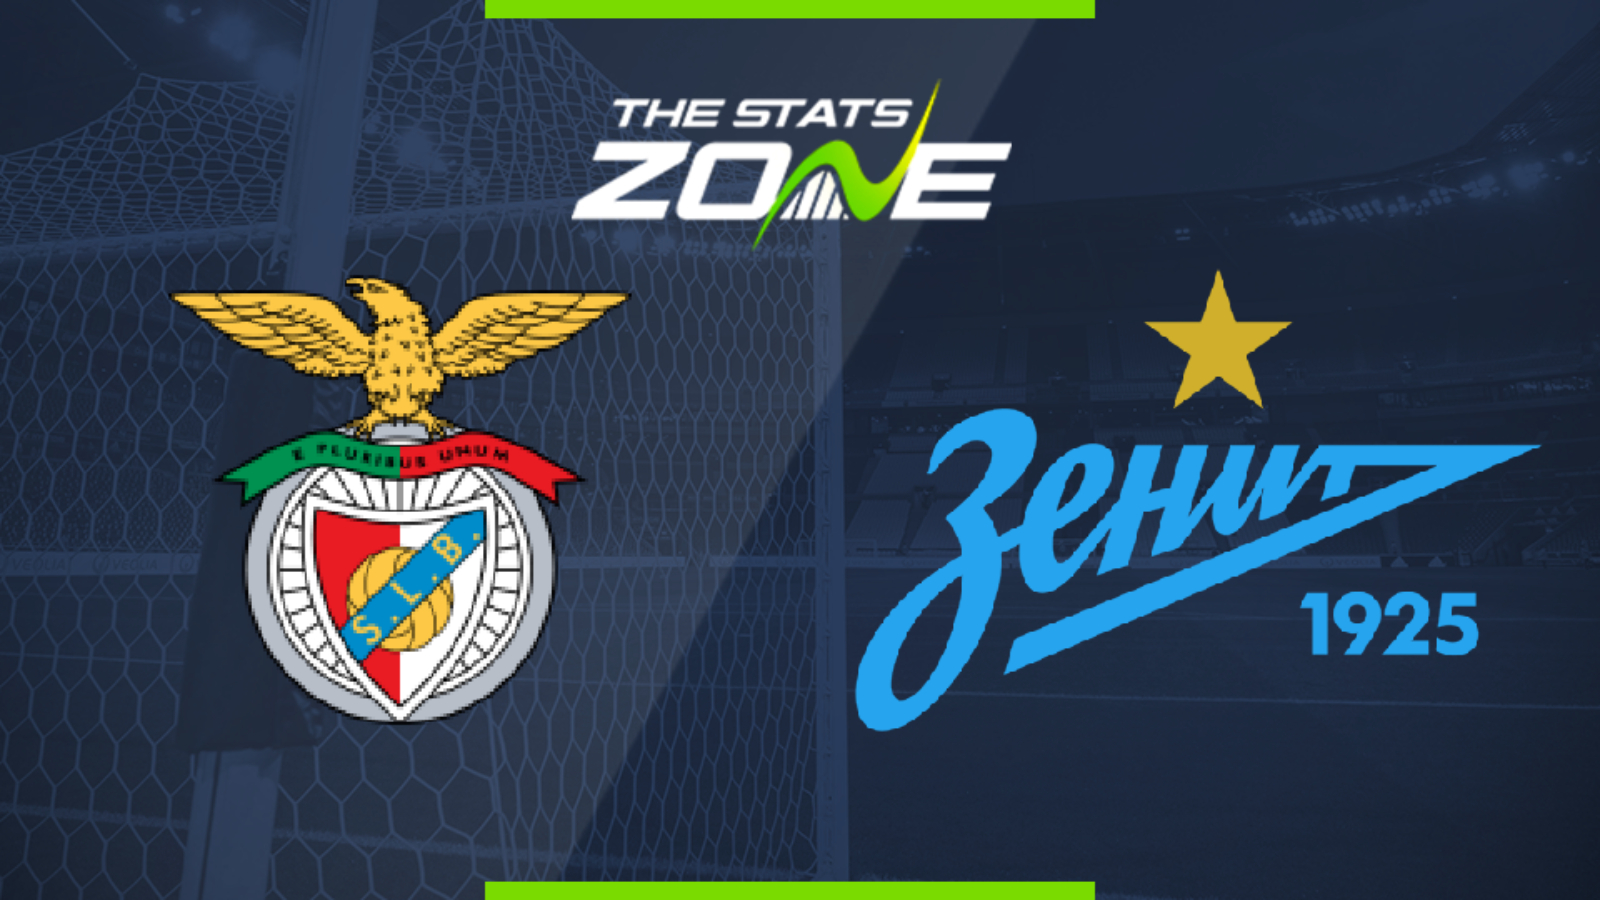 2019-20 UEFA Champions League – Benfica vs Zenit Preview & Prediction - The Stats Zone